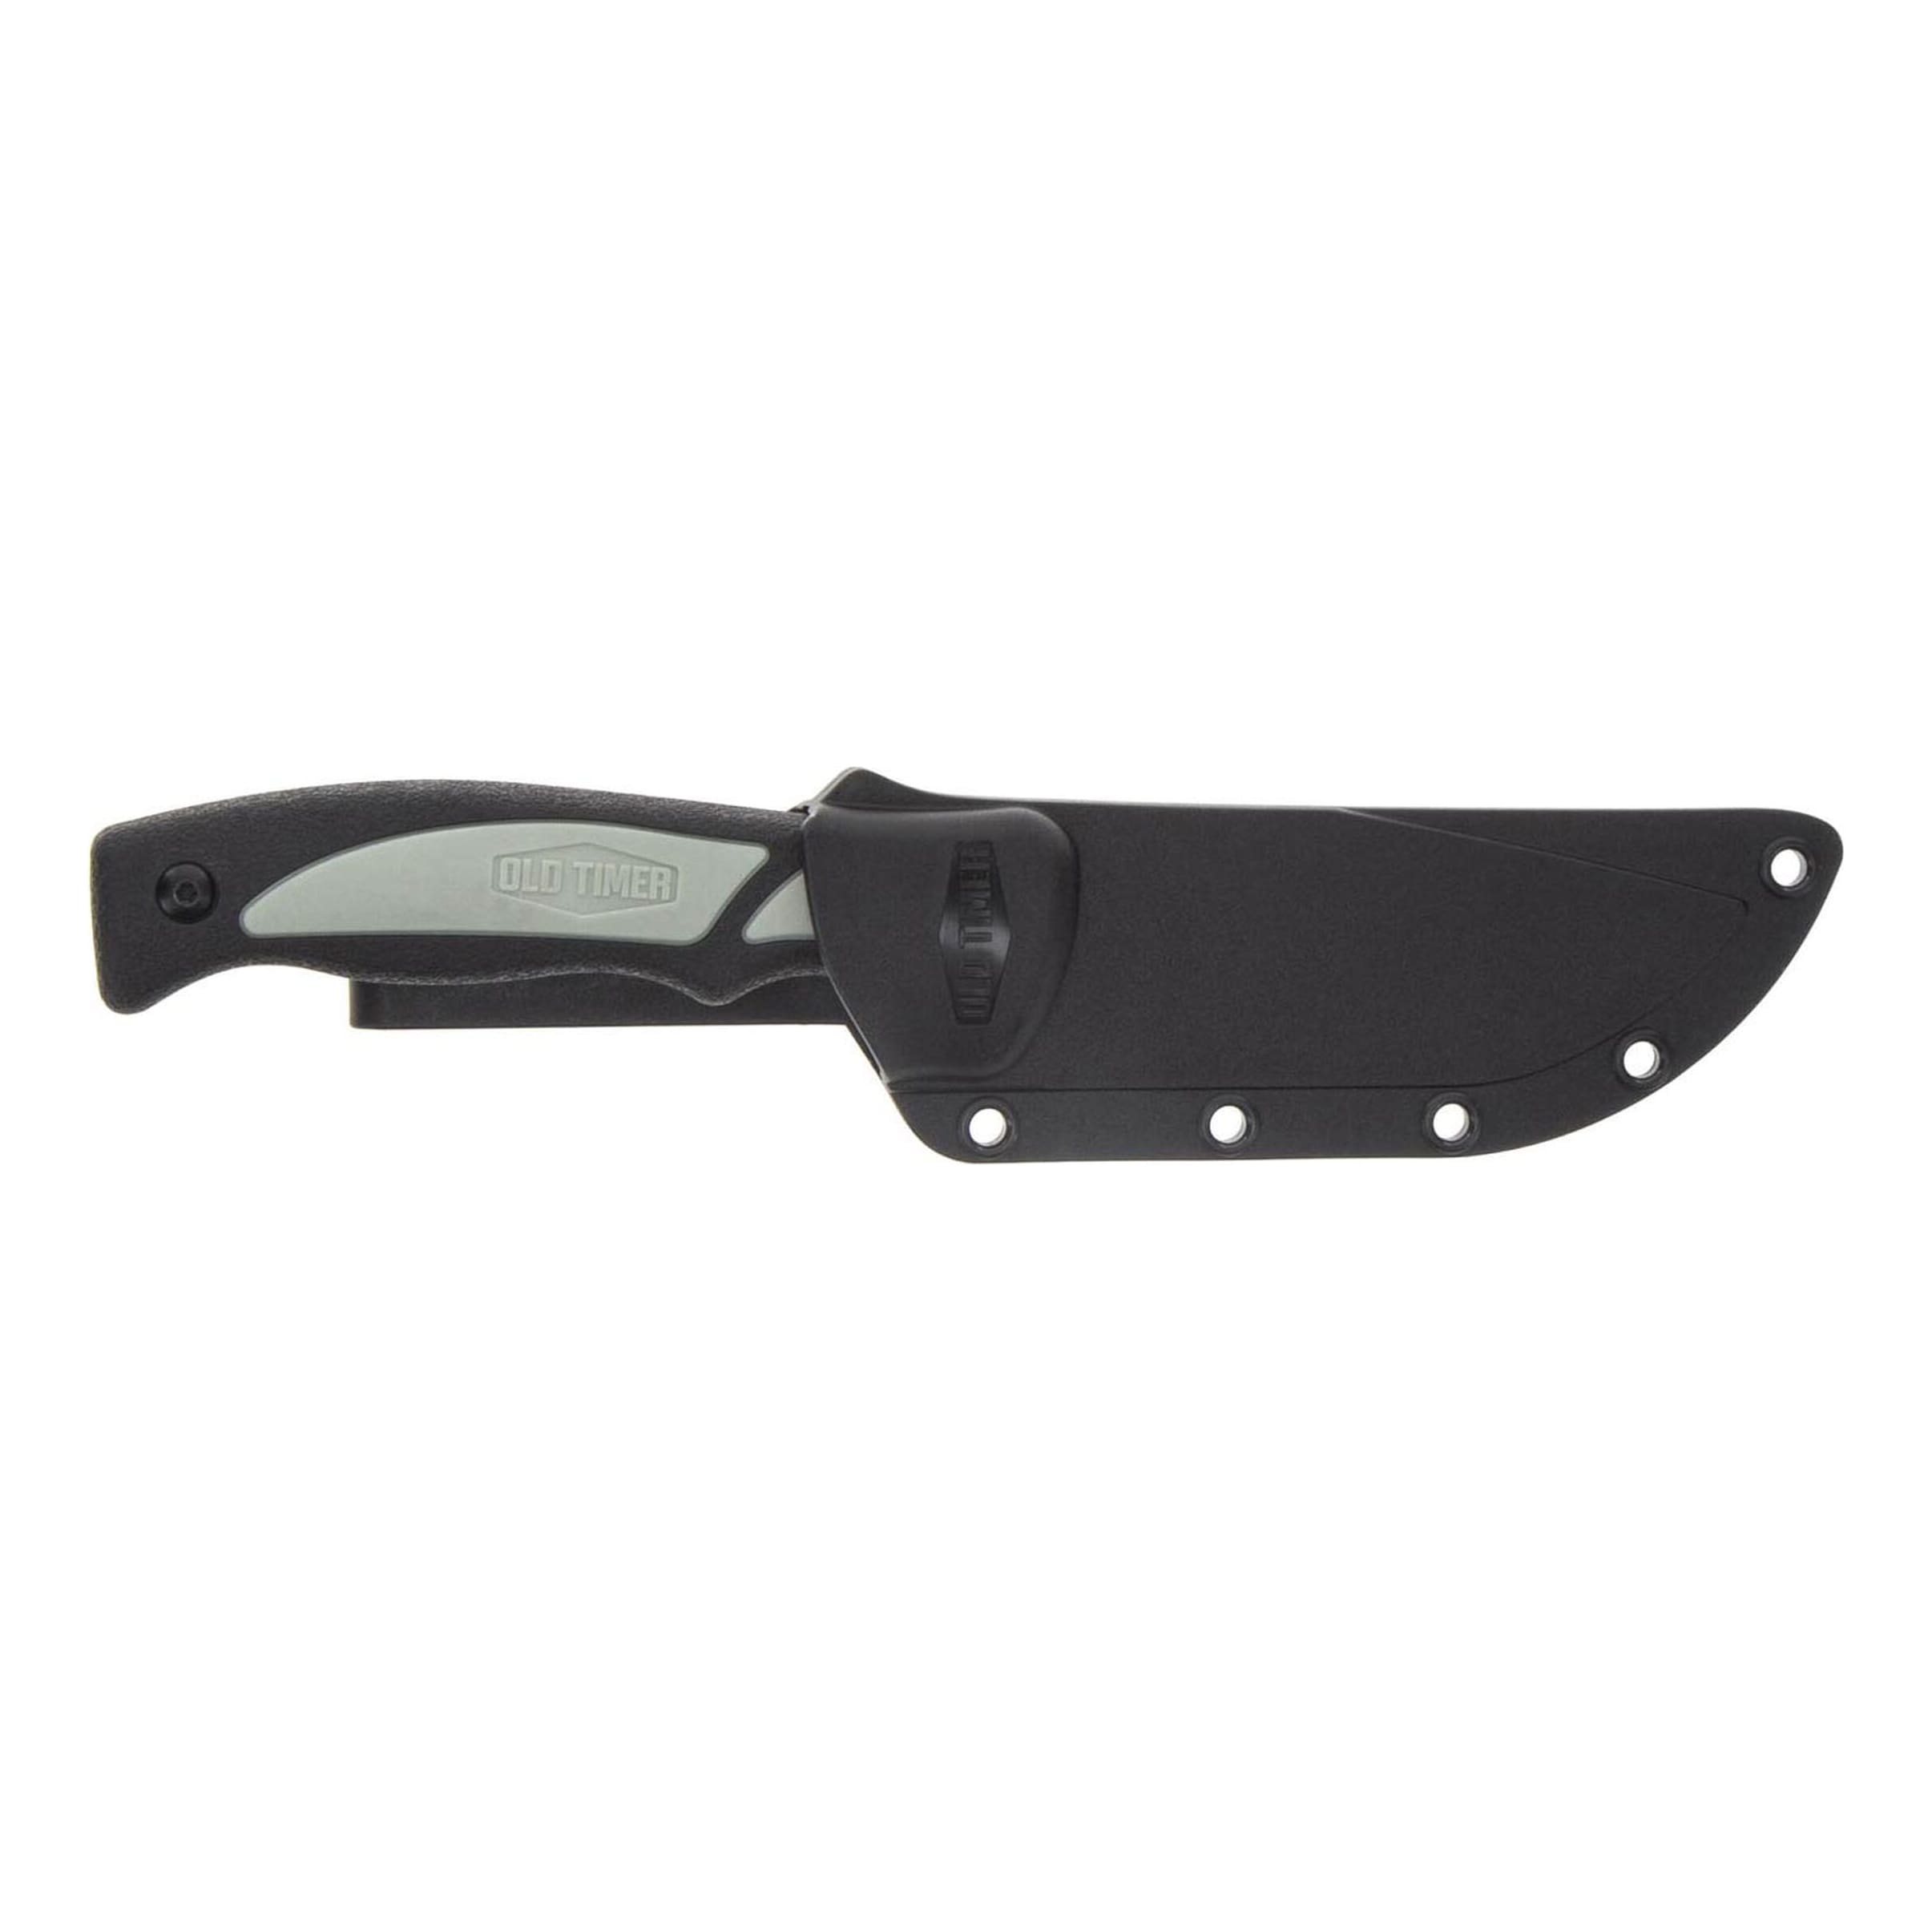 Old Timer® Trail Boss® Caping Fixed Blade Knife